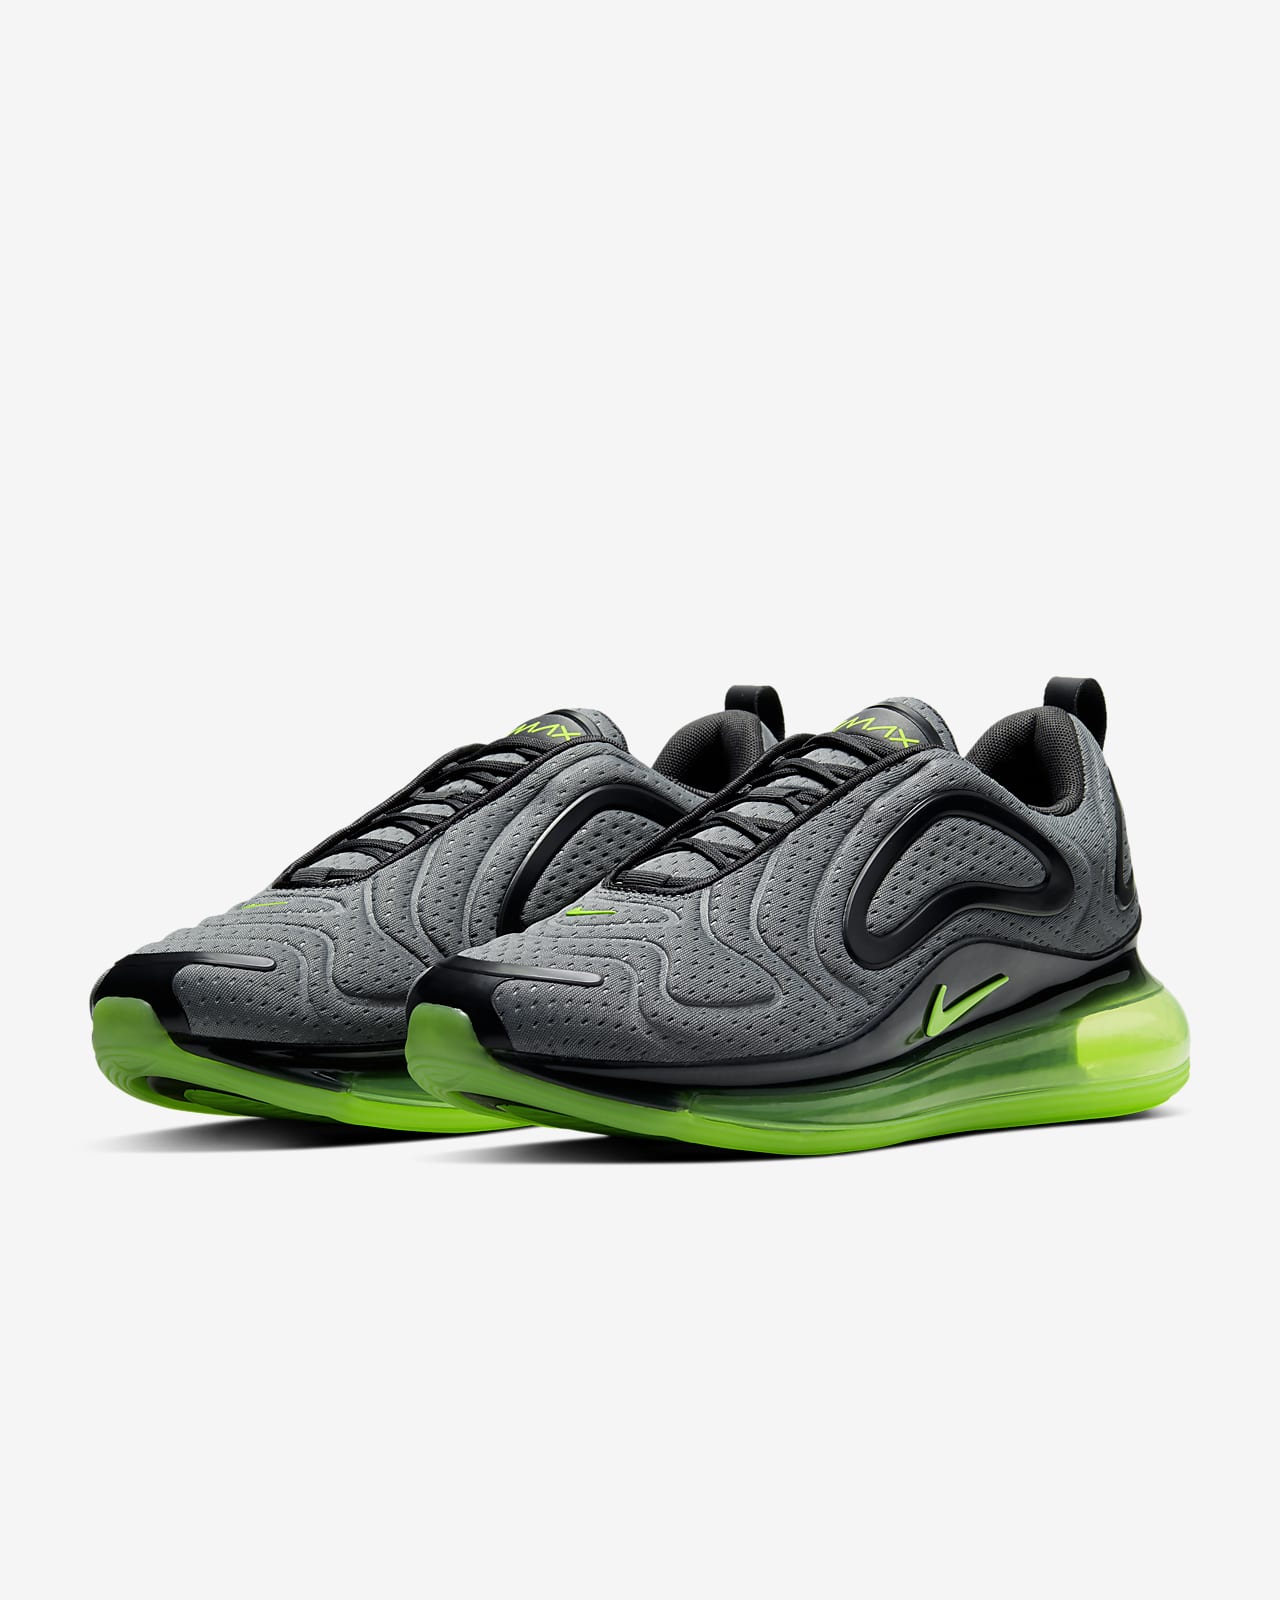 nike 720 offers